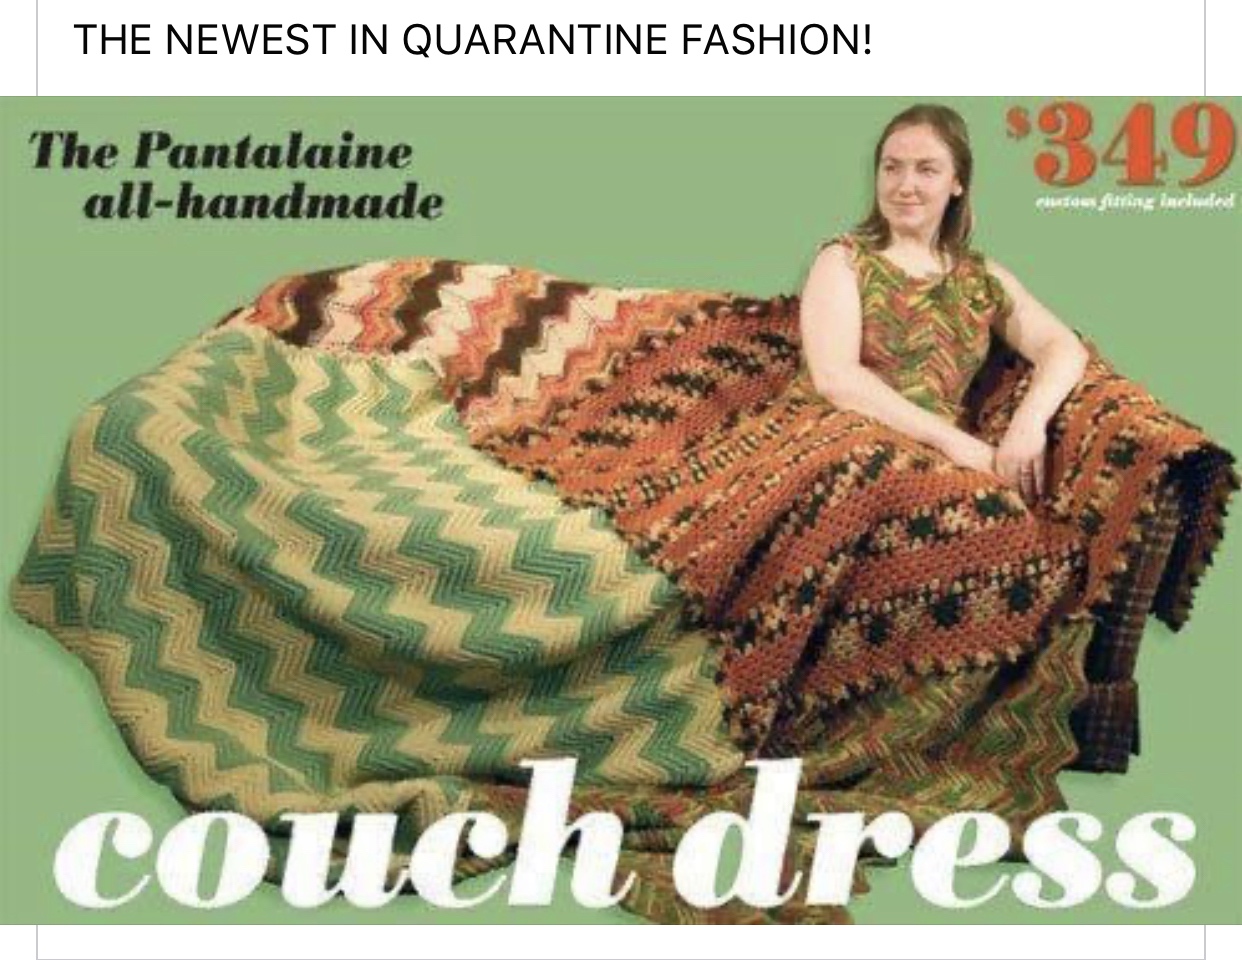 couch dress - The Newest In Quarantine Fashion! So 49 The Pantalaine allhandmade musu gitting incluind couch dress